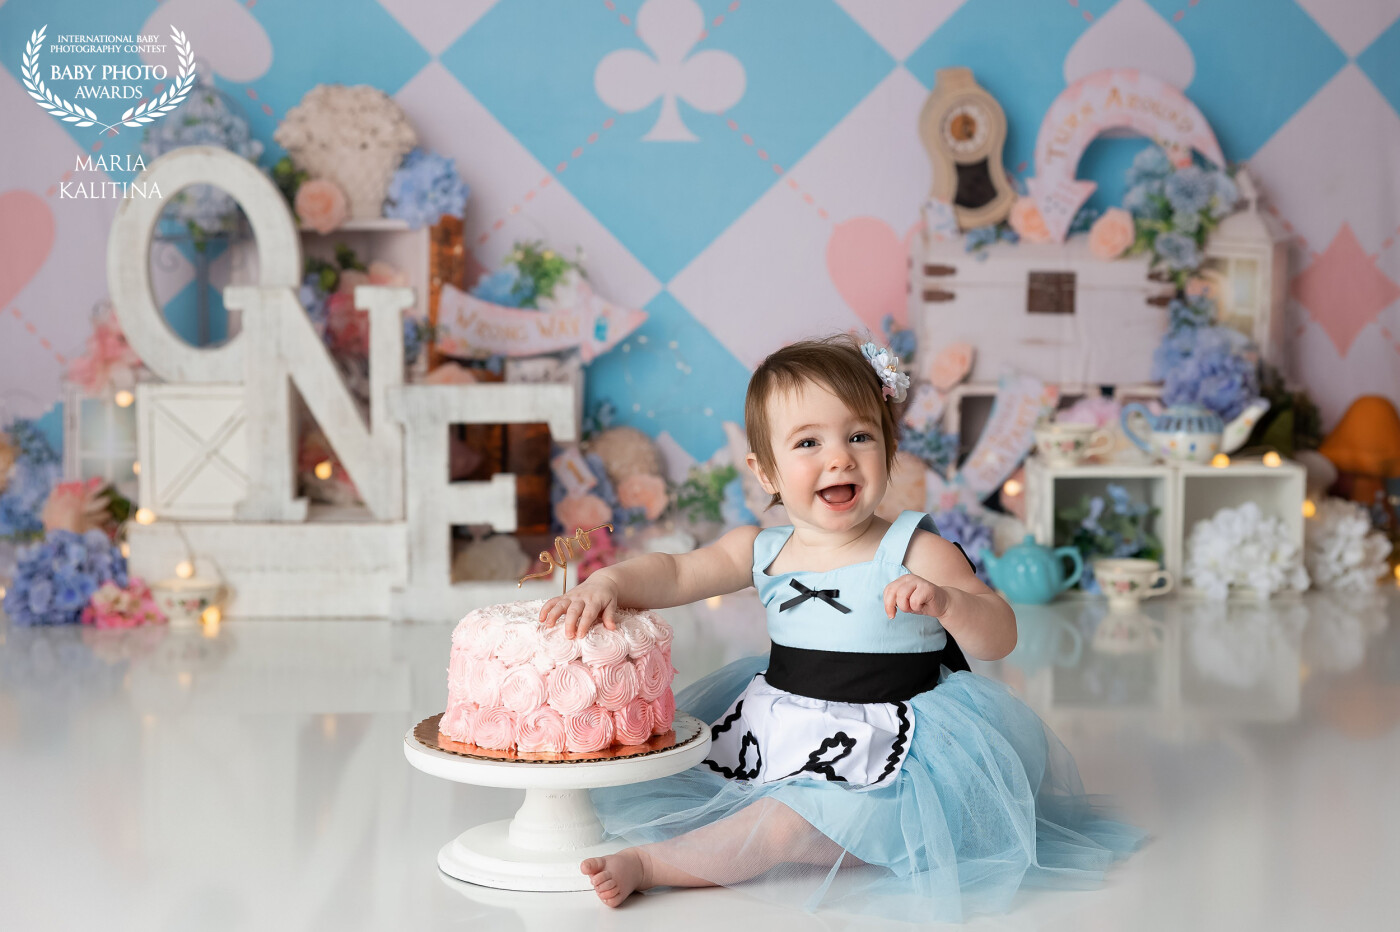 This is an adorable cake smash set with "Alice in Wonderland" theme requested by my client. Baby girl had so much fun playing with her cake; her smile is so captivating! It was such a wonderful experience for her and her parents. The first year when baby is so little yet their world is full of discoveries fly by in a blink of an eye, and photos of these cute moments will be cherished for many many years.